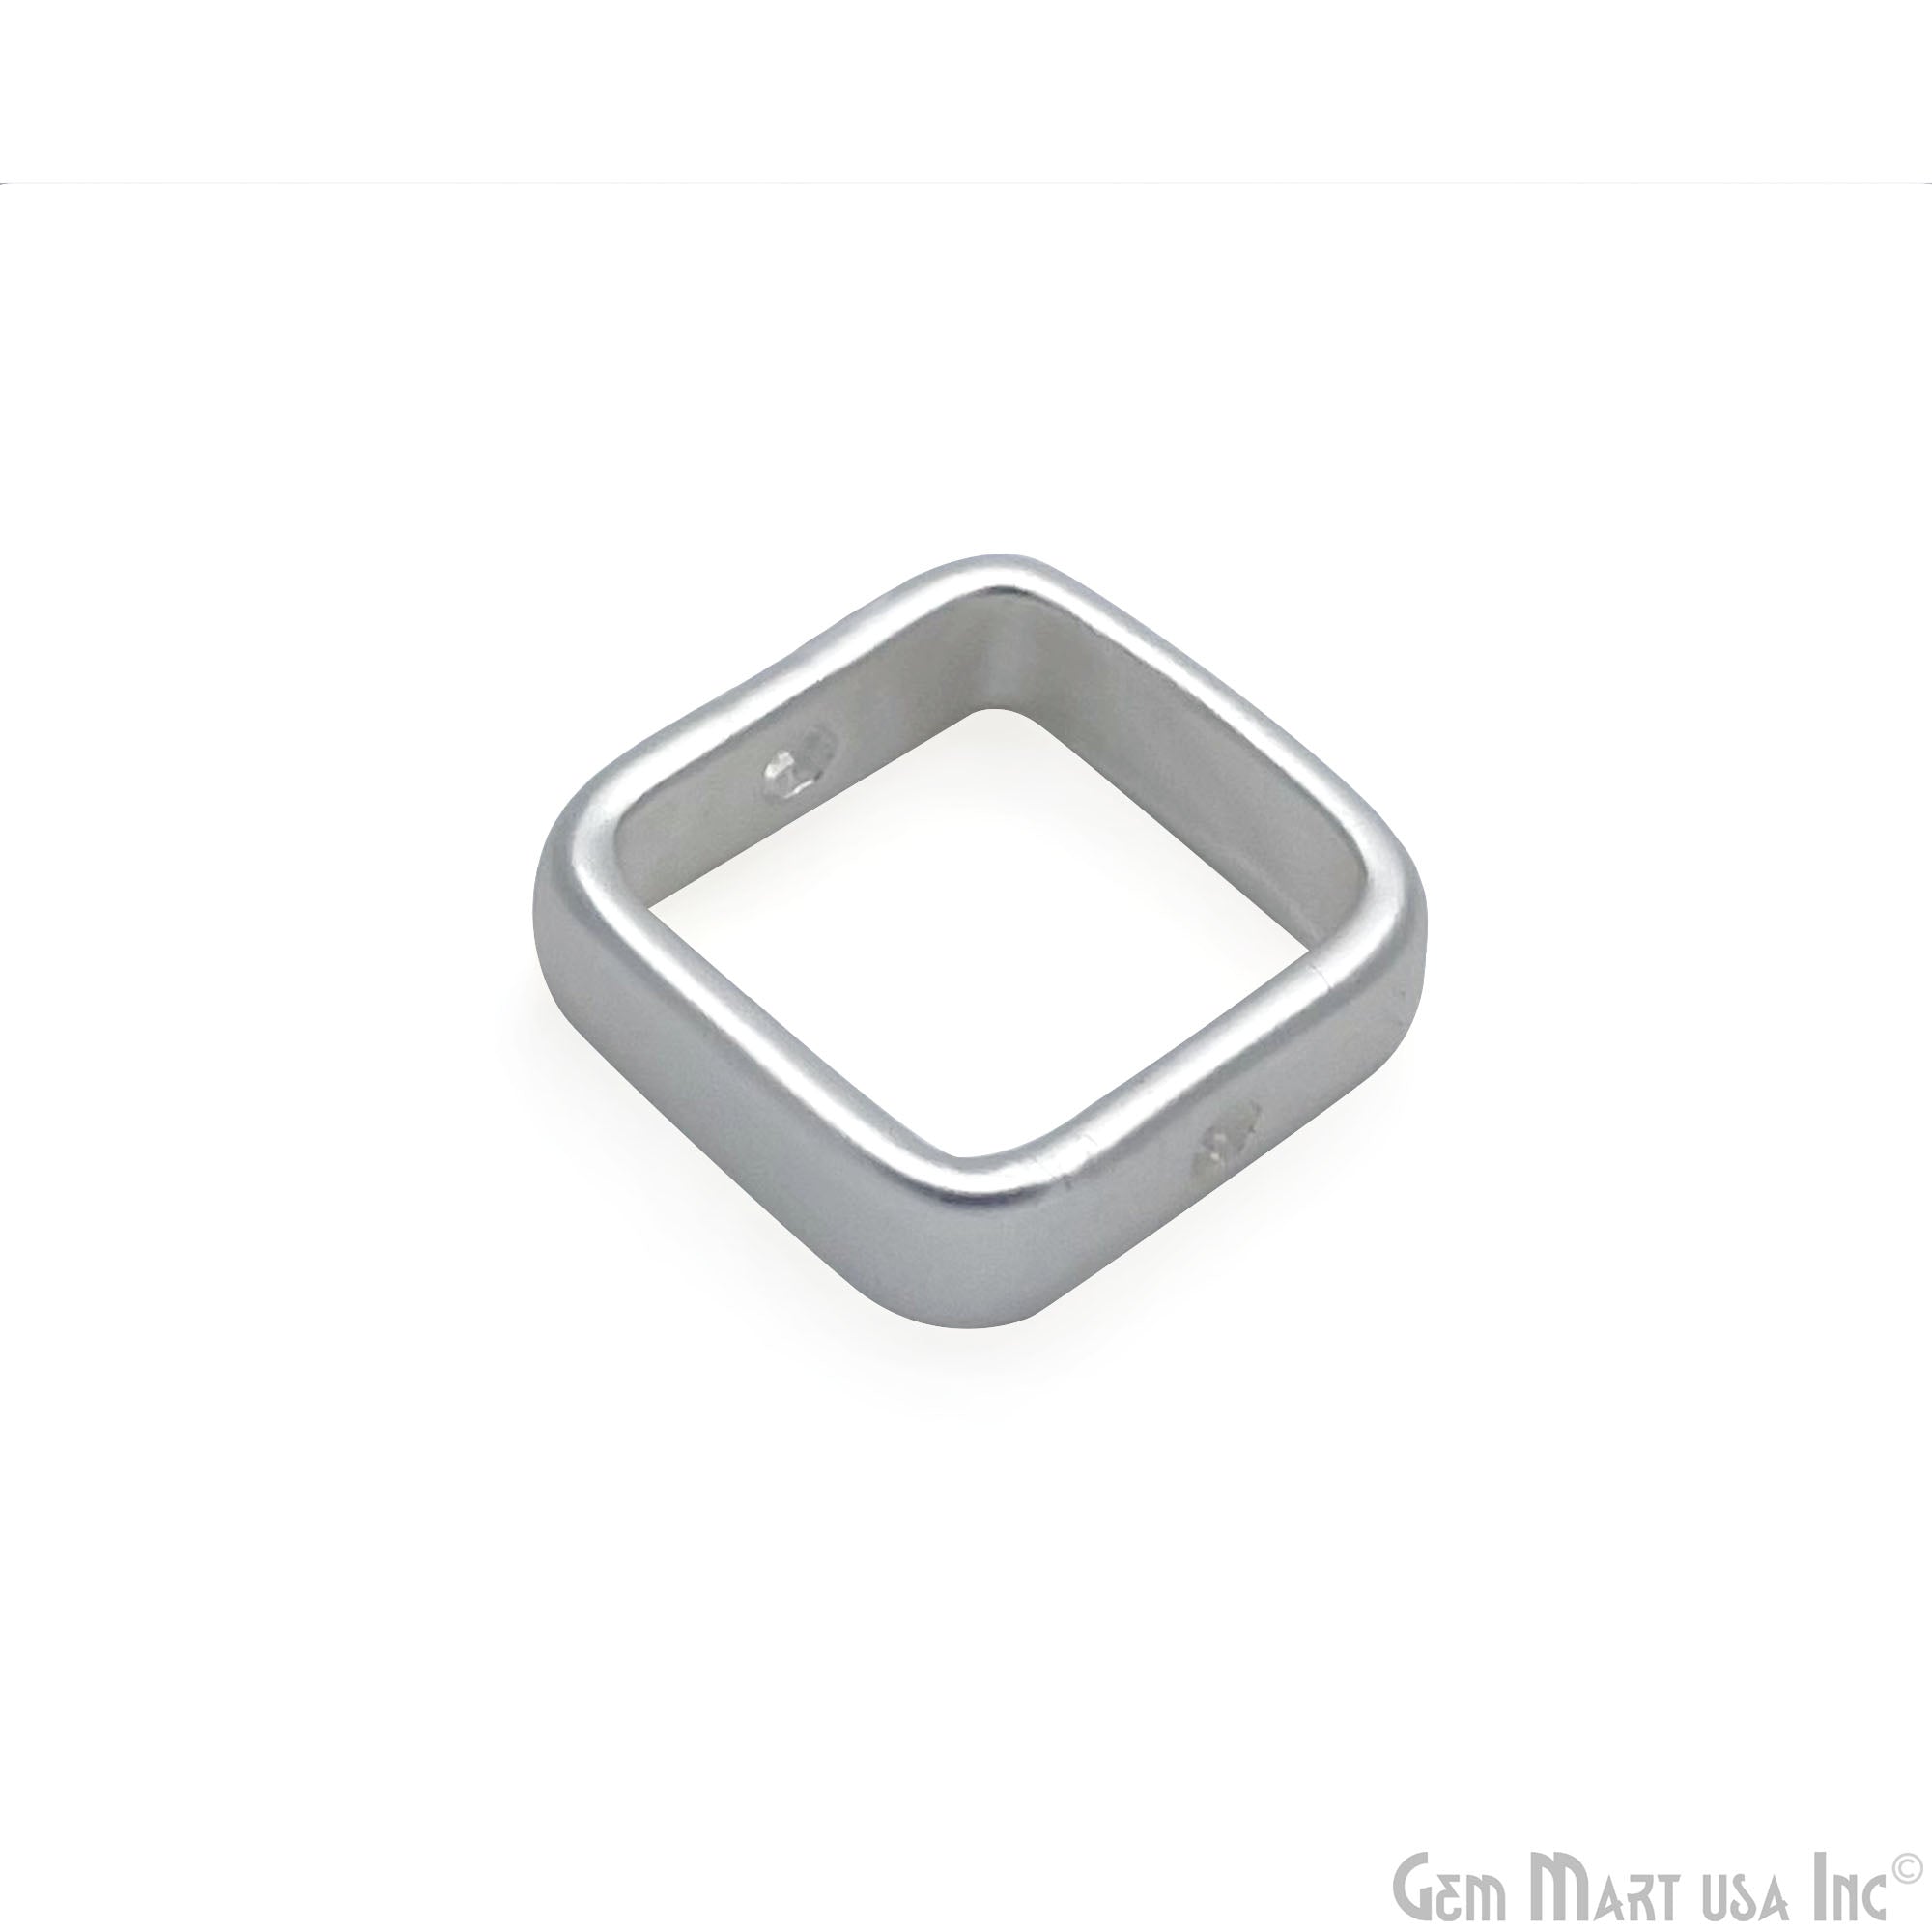 Square Frame Charms, Connector Charms, Closed Ring, Square Pendant, Square Connector, Ring Connectors